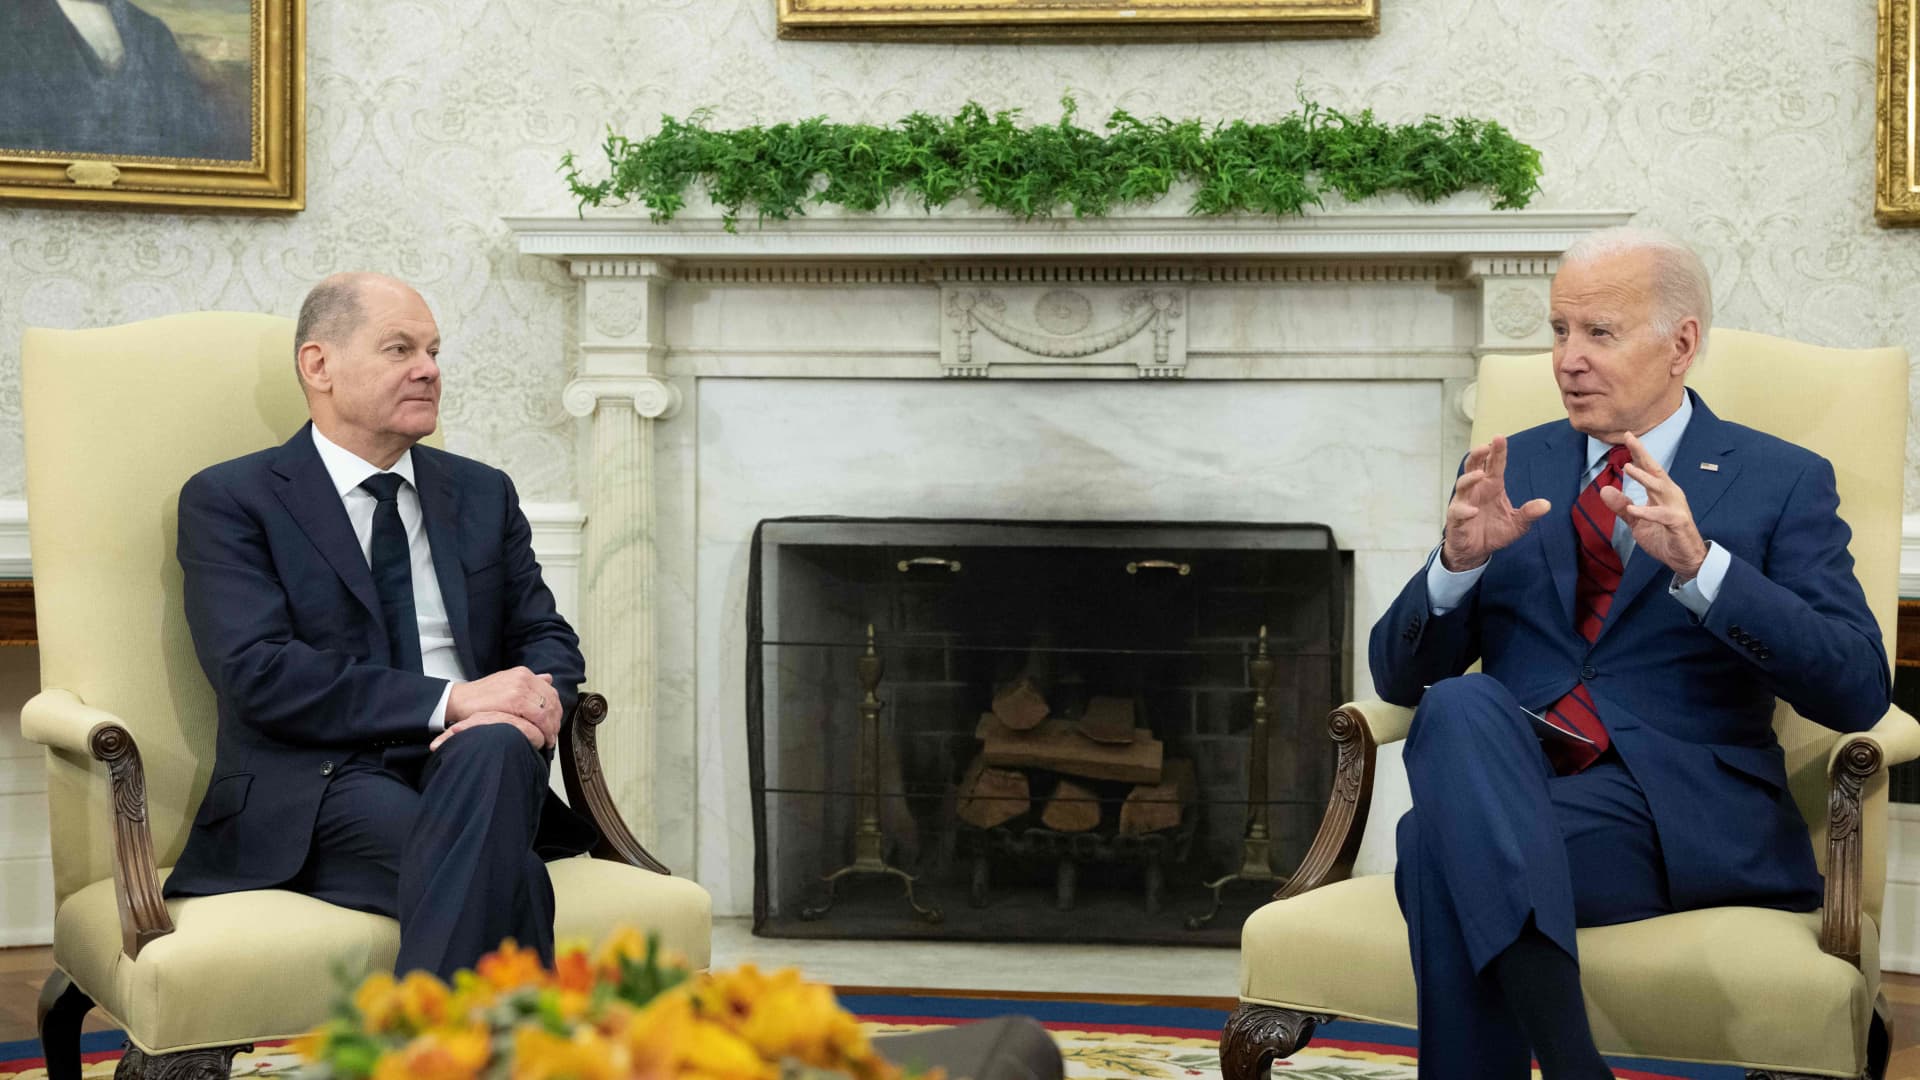 US President Joe Biden meets with German Chancellor Olaf Scholz in the Oval Office of the White House in Washington, DC, on March 3, 2023.